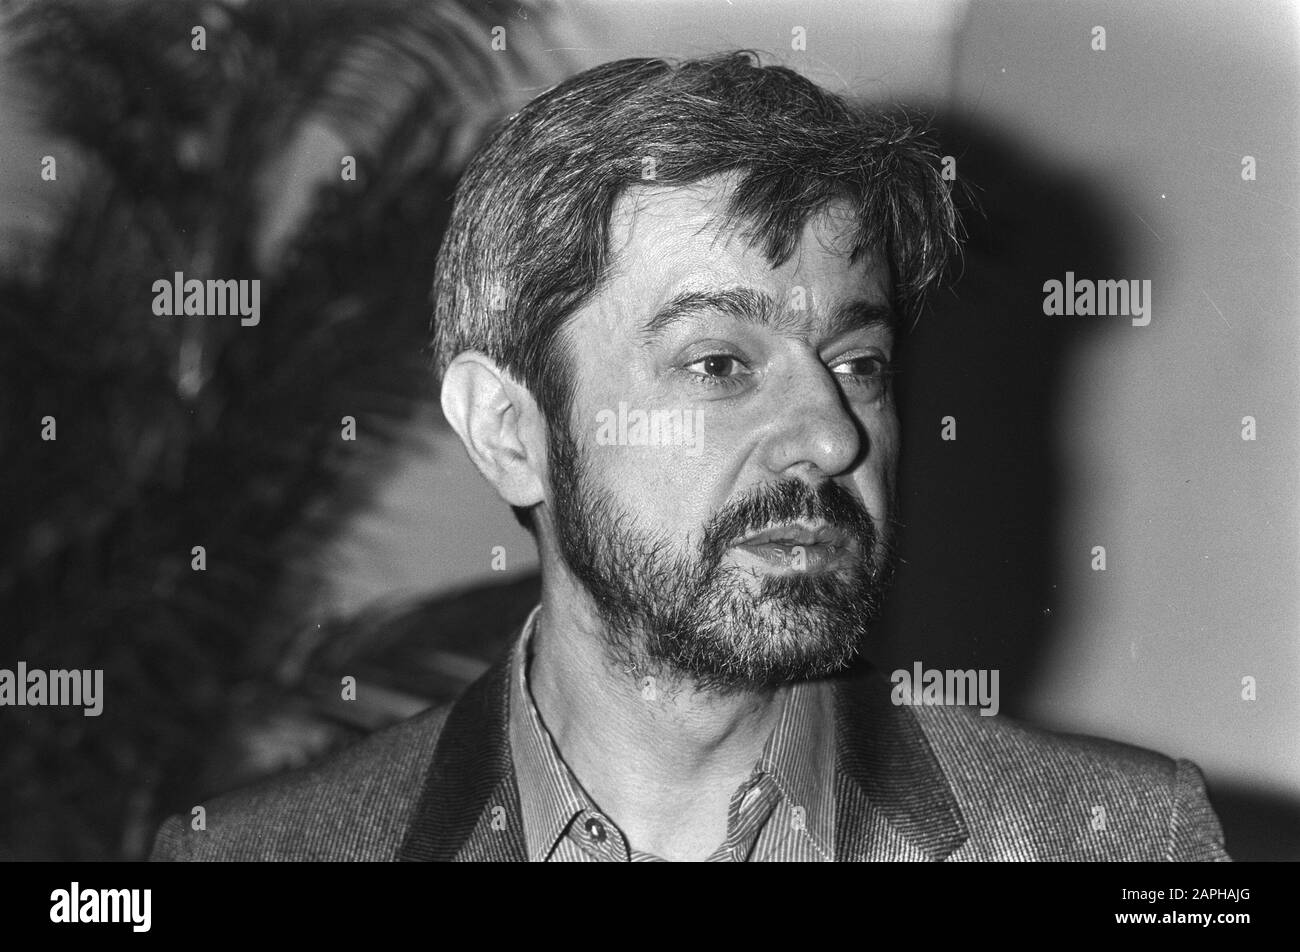 The German writer Jurek Becker, in 1976 in the GDR disbarred from the party in connection with his views in the case Wolff Biermann, staying for a lecture in Amsterdam Date: November 14, 1981 Location: Amsterdam, Noord-Holland Keywords: portraits, writers Personal name: Becker, Jurek Stock Photo